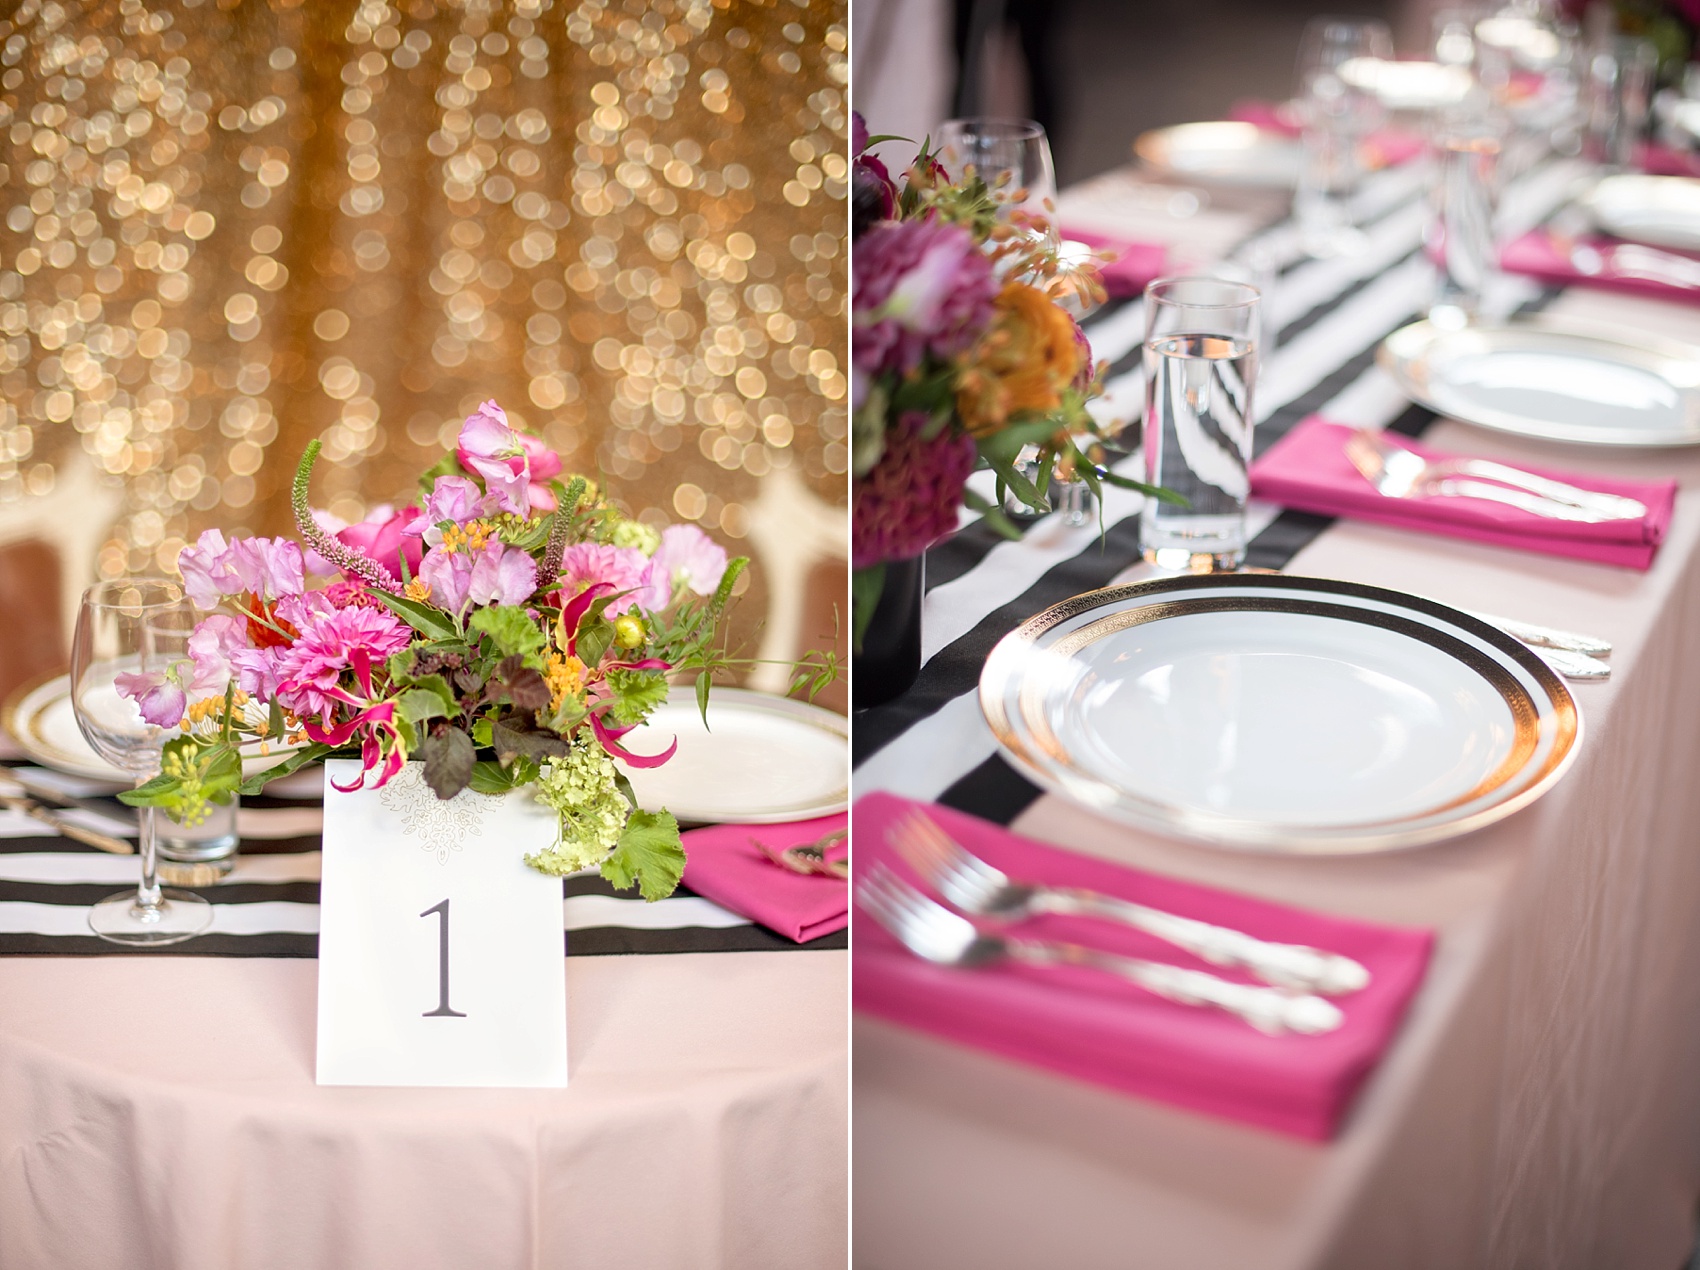 501 Union lesbian wedding. Photos by Mikkel Paige Photography, in Brooklyn, NYC. Planning by Ashley M Chamblin Events. Overall room photo with pink linens and brightly colored flower centerpieces. Gold sequin backdrop.